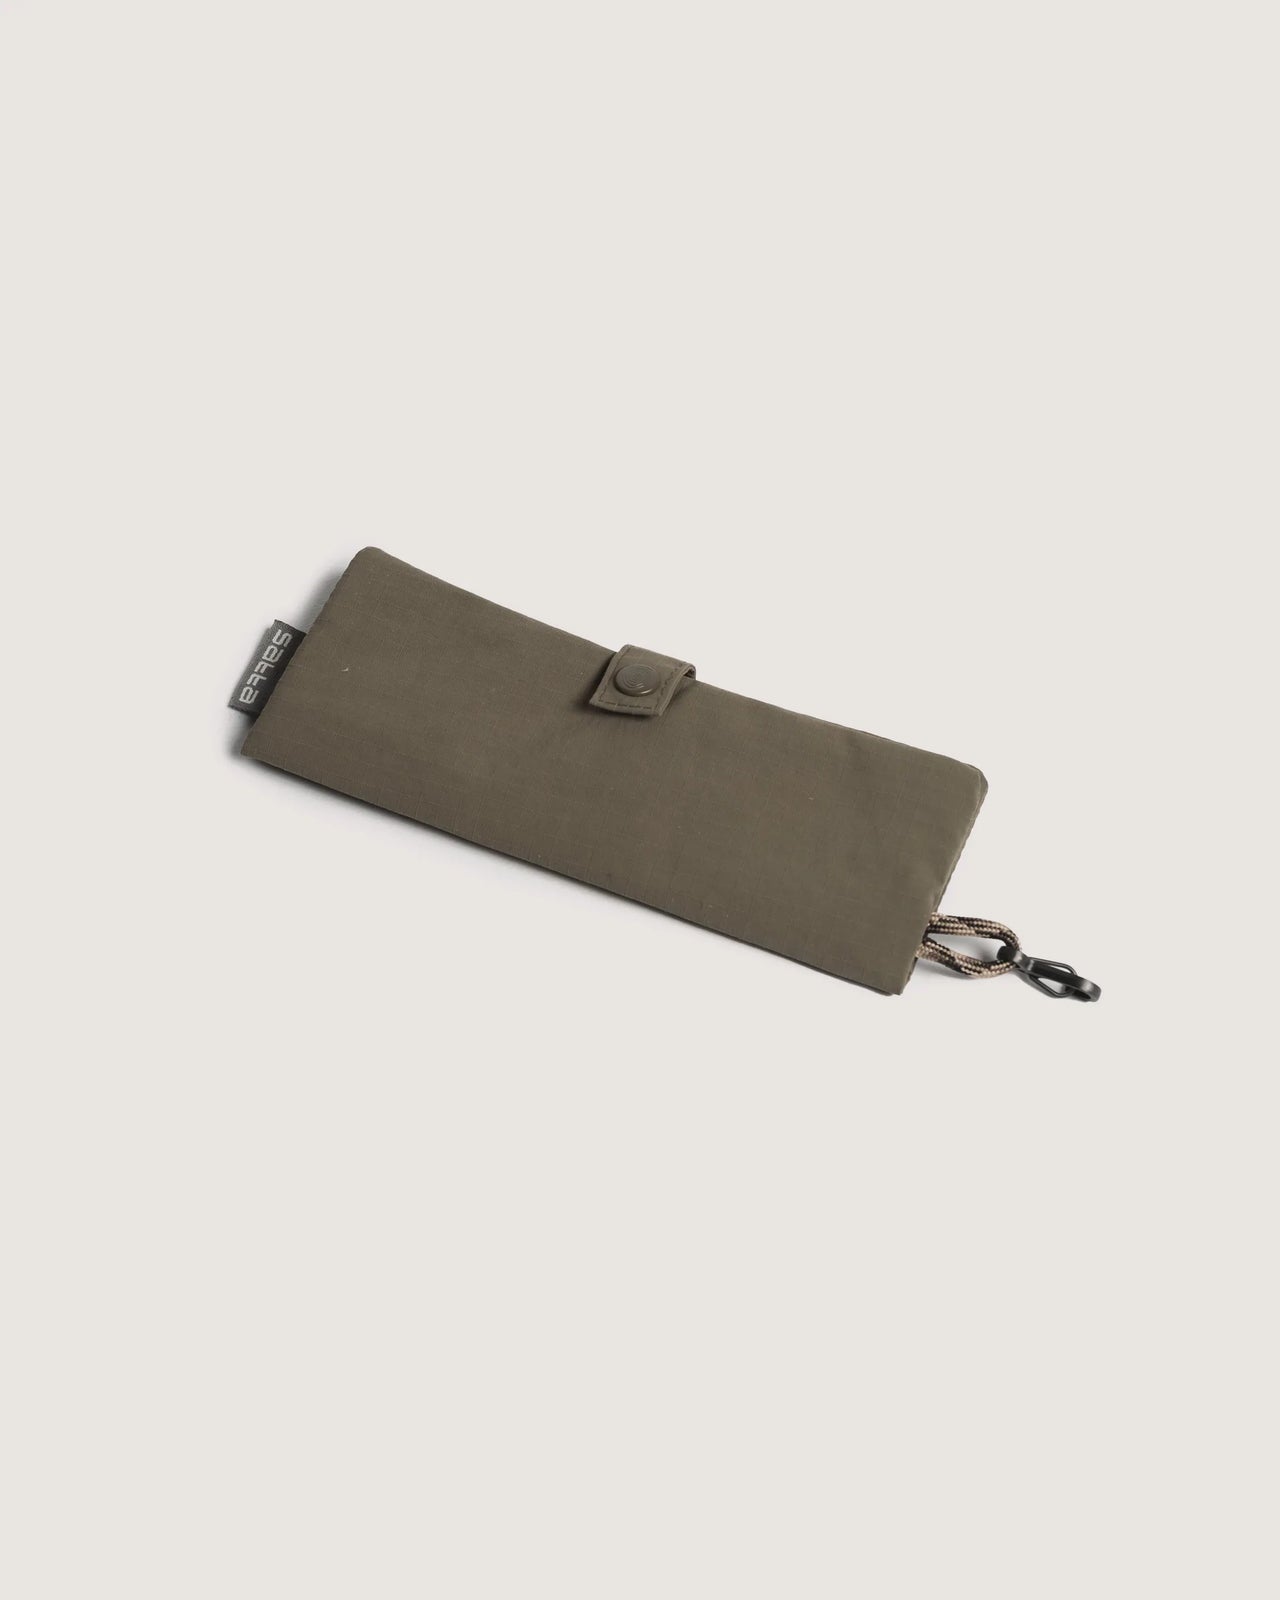 Satta | Rolling Pouch - Olive Drab